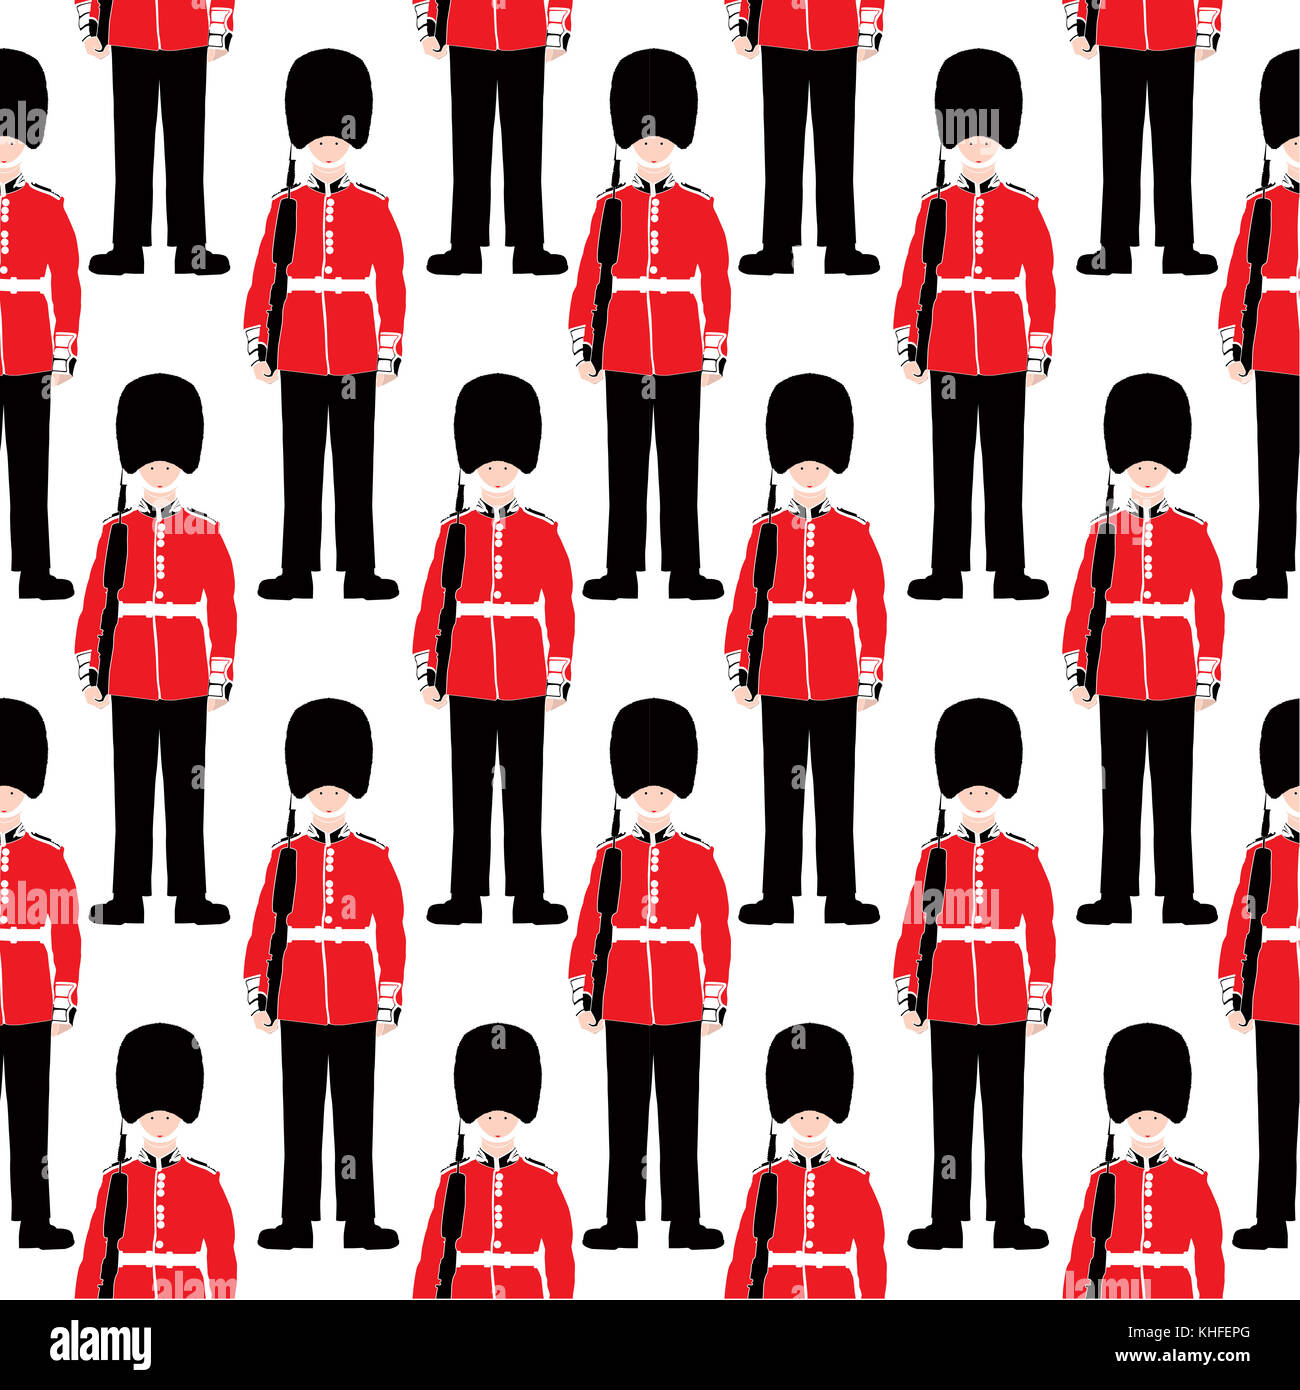 Beefeater soldier seamless pattern - London Symbol - Very detailed, isolated illustration - White background Stock Photo